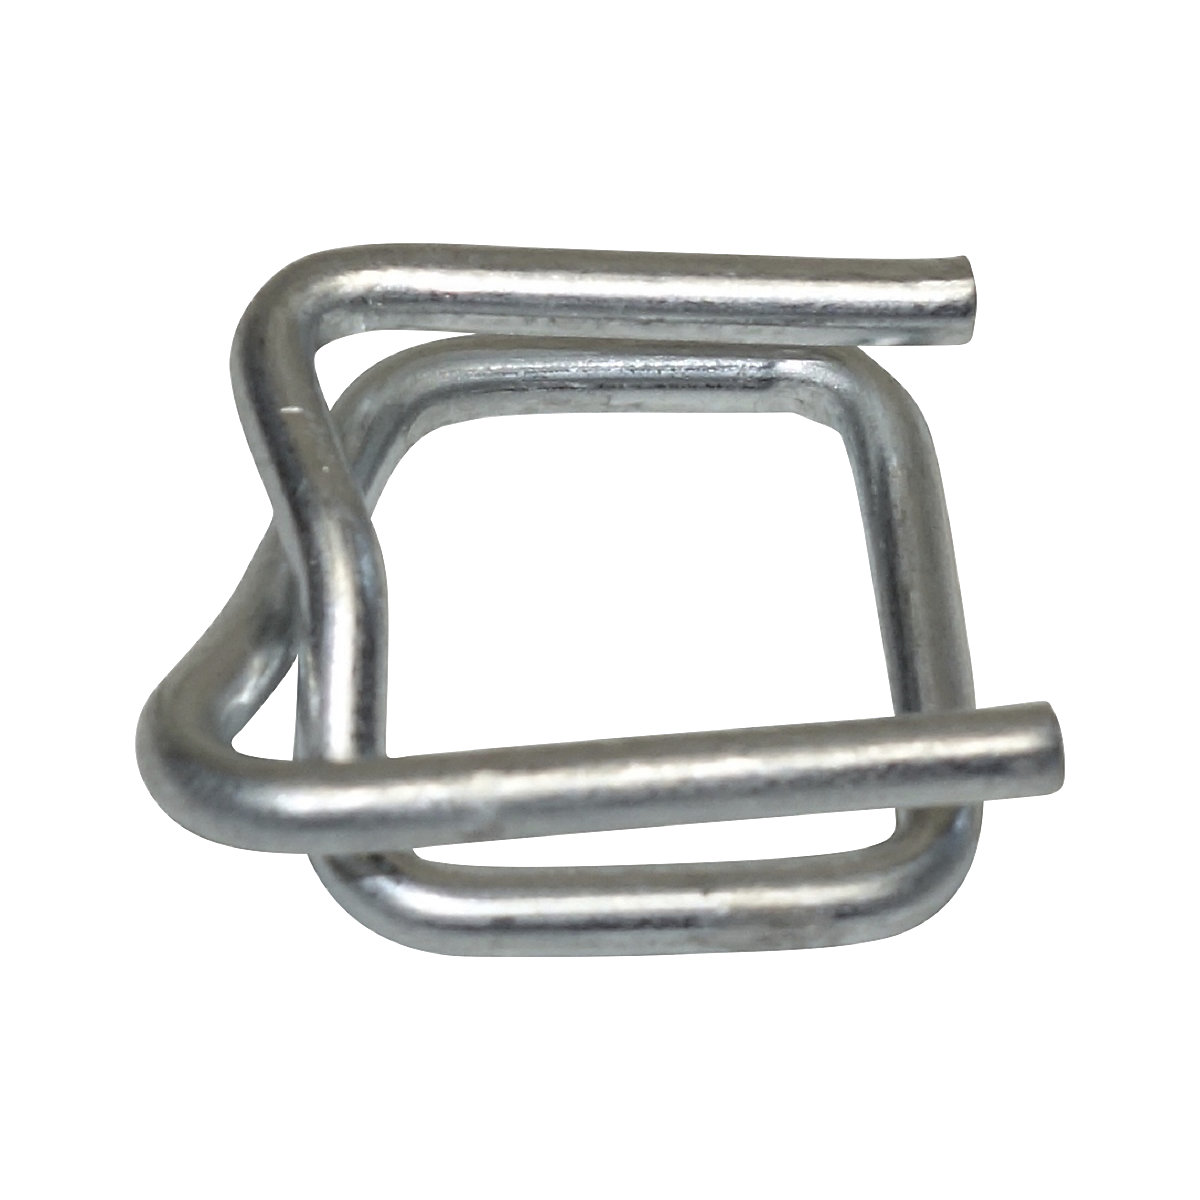 Fastening clips, zinc plated